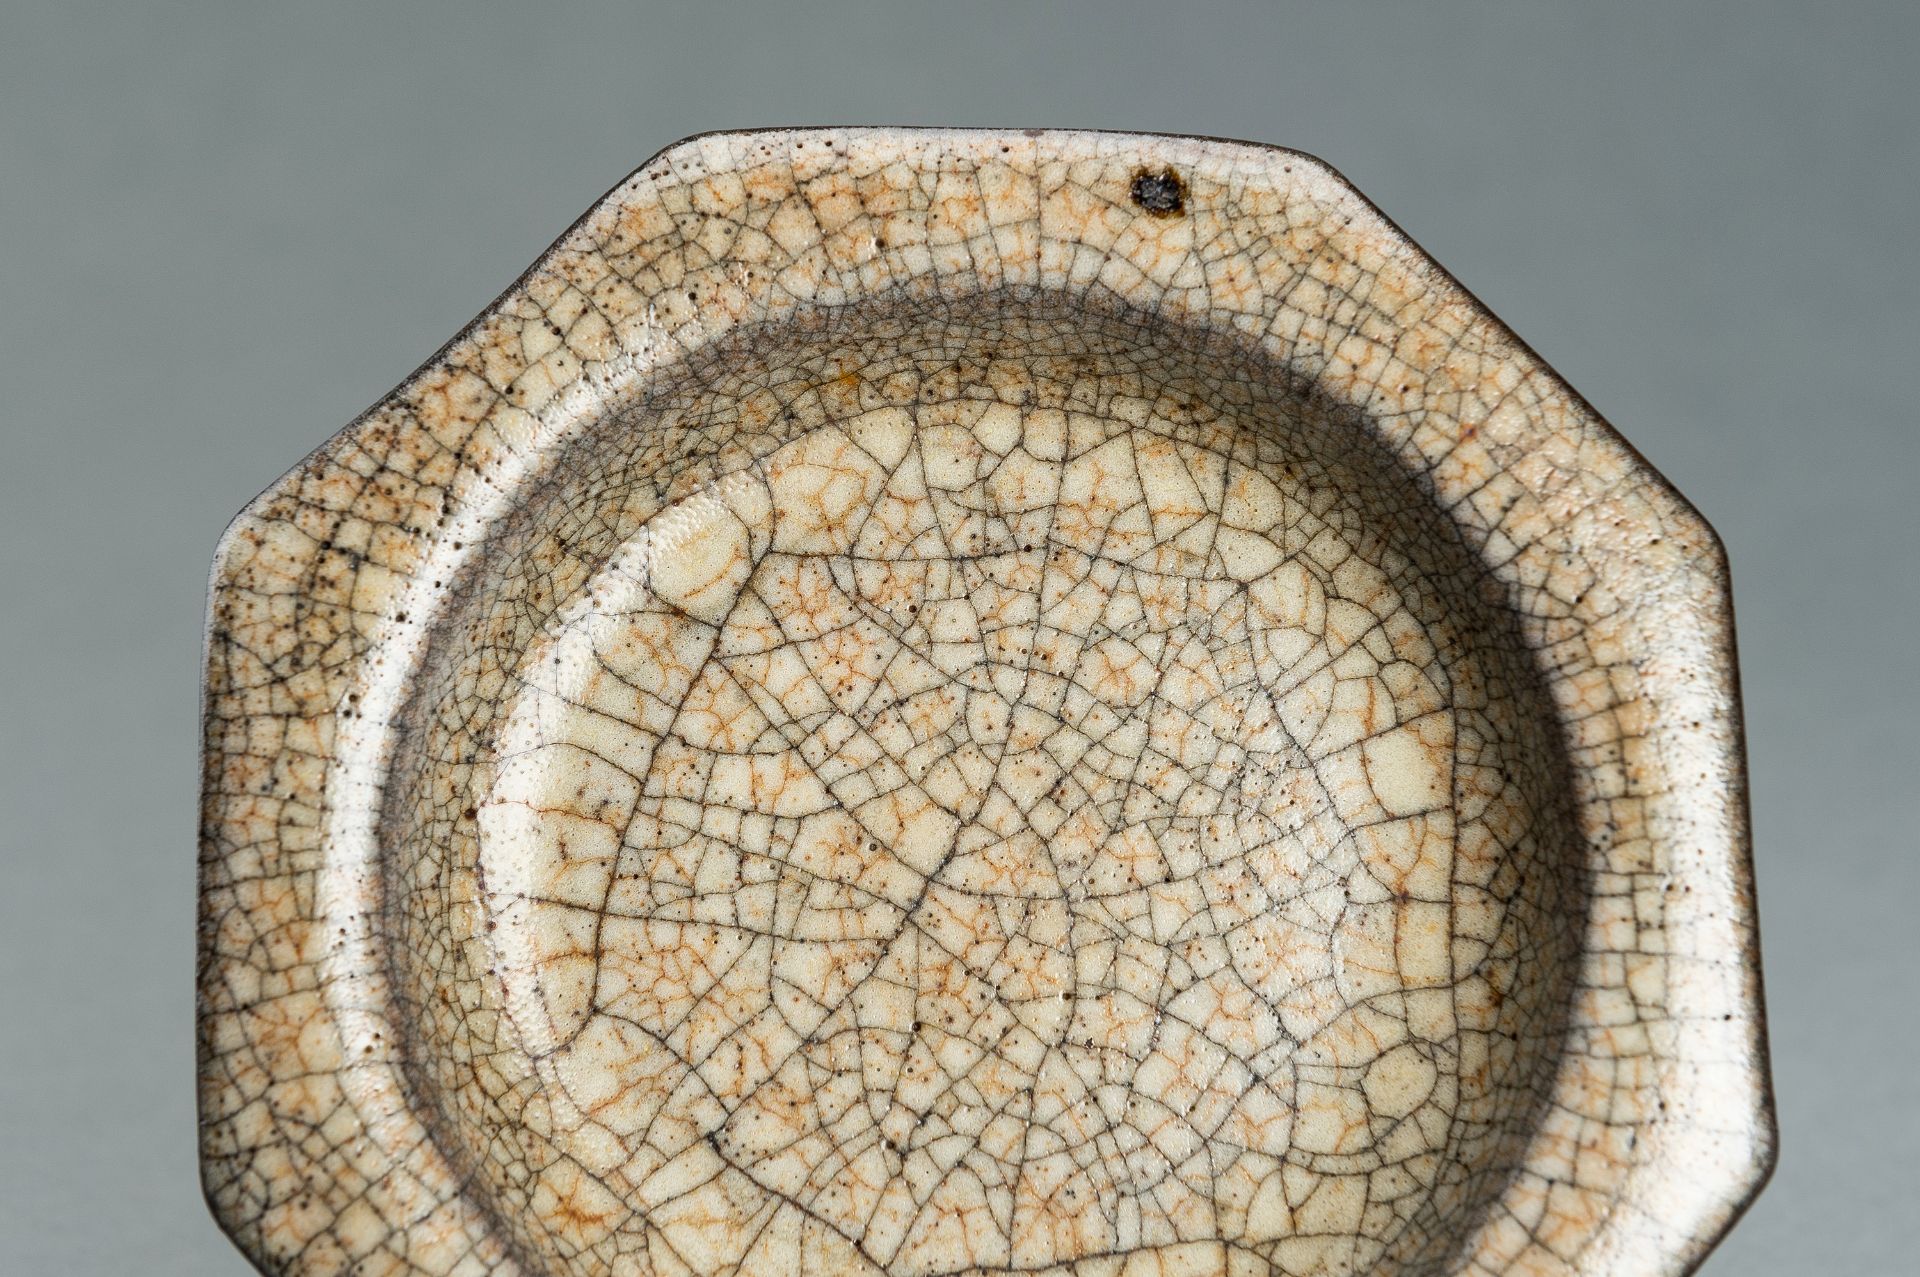 AN OCTAGONAL GE-STYLE GLAZED PORCELAIN DISH, QING DYNASTY - Image 3 of 10